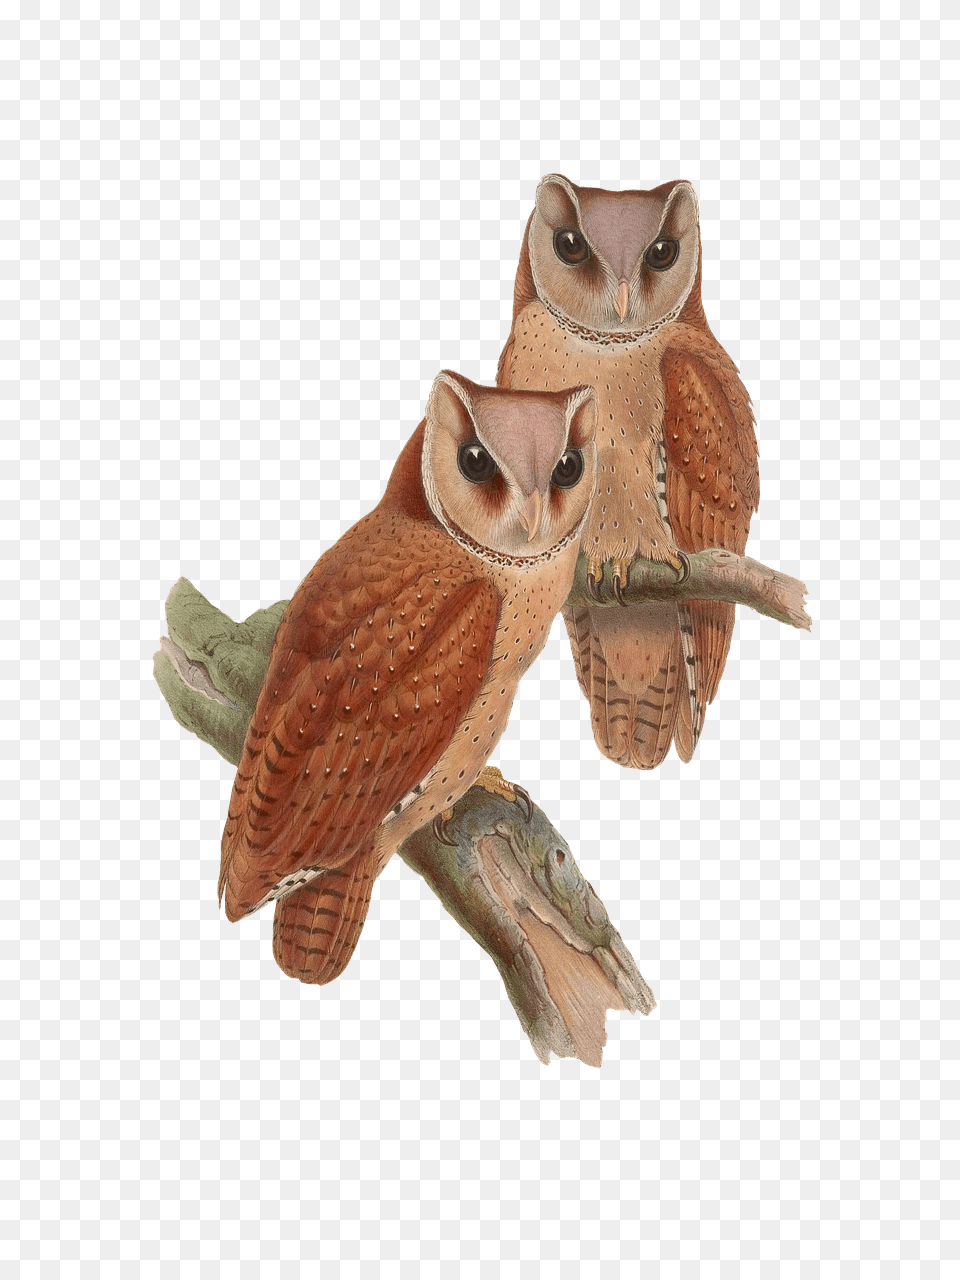 Owls Sitting On A Branch, Animal, Bird, Owl Png Image